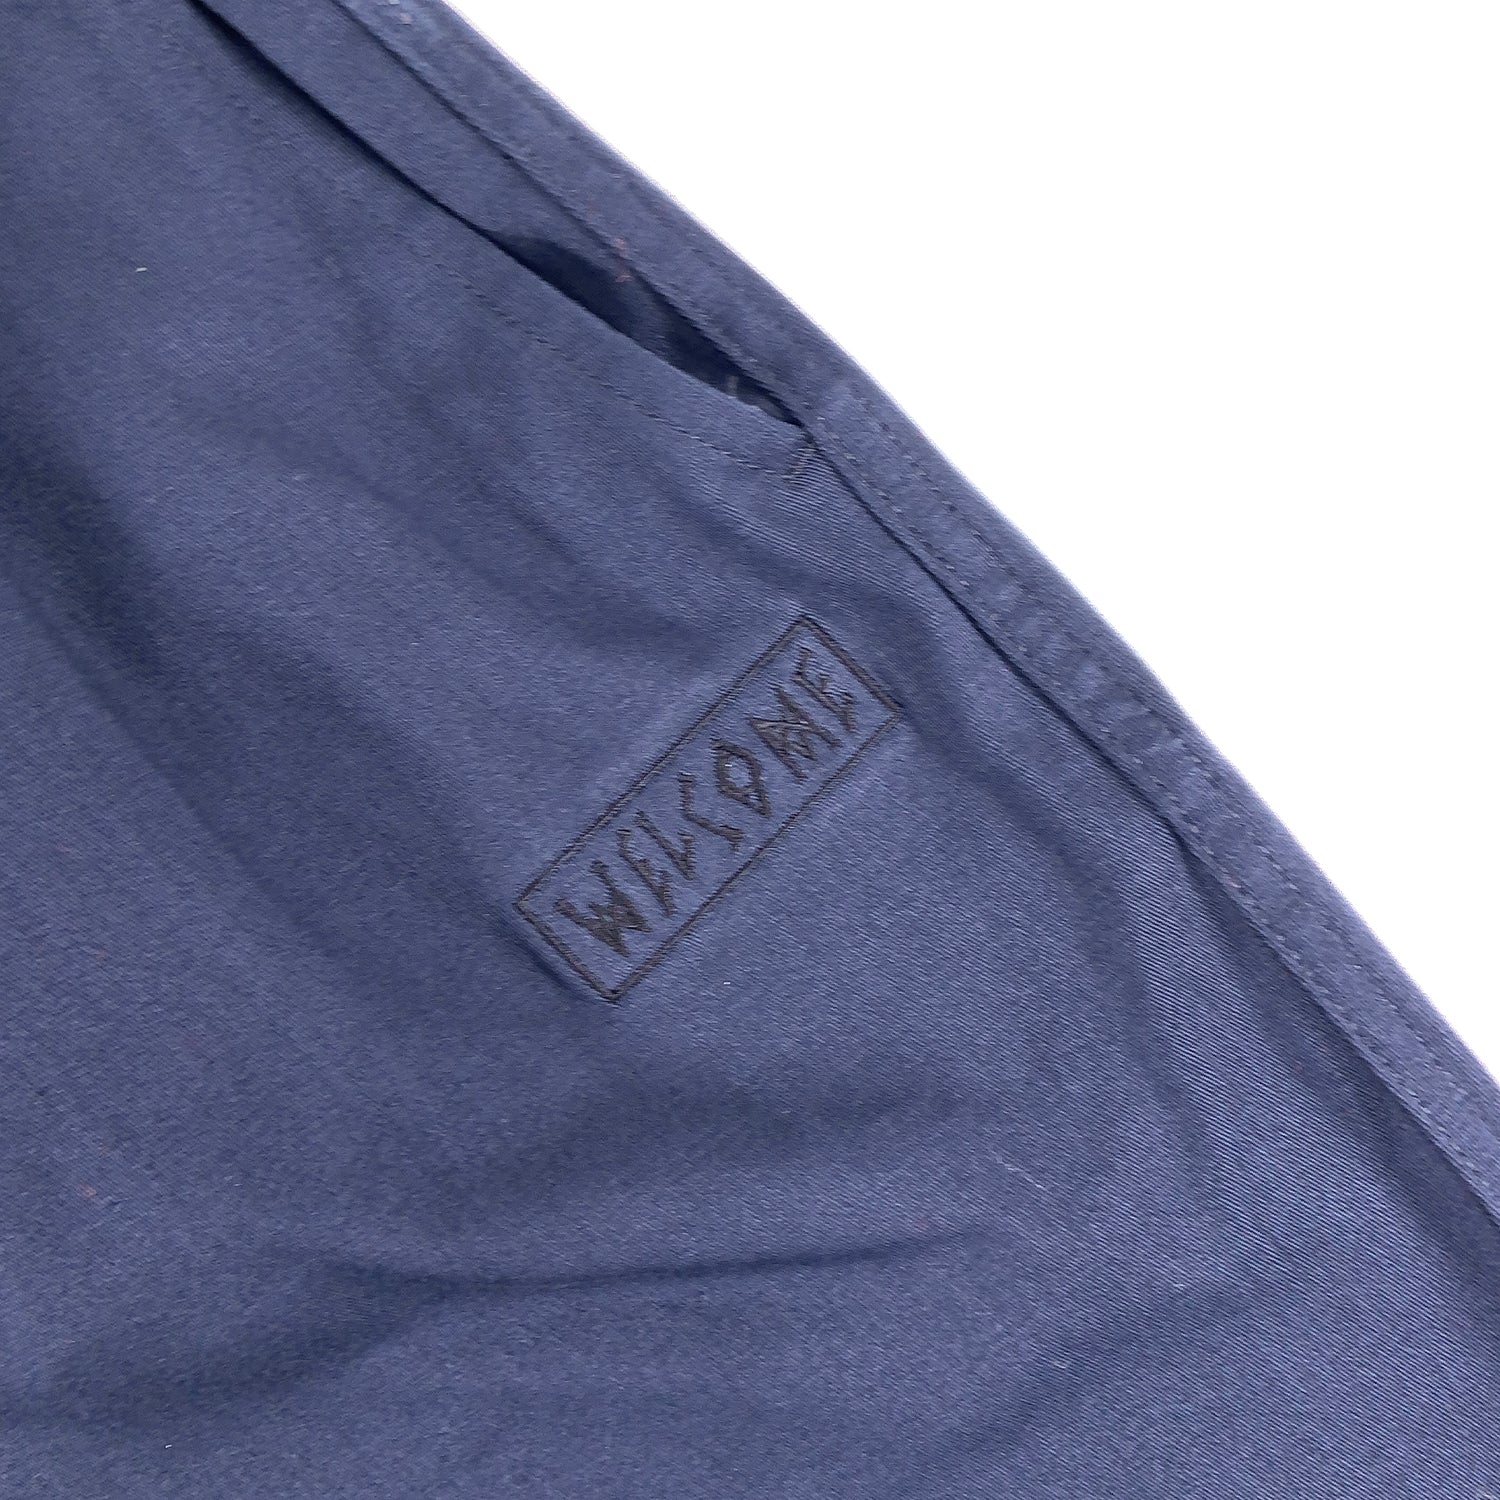 Welcome - Principal Twill Elastic Pants - Carbon - Prime Delux Store